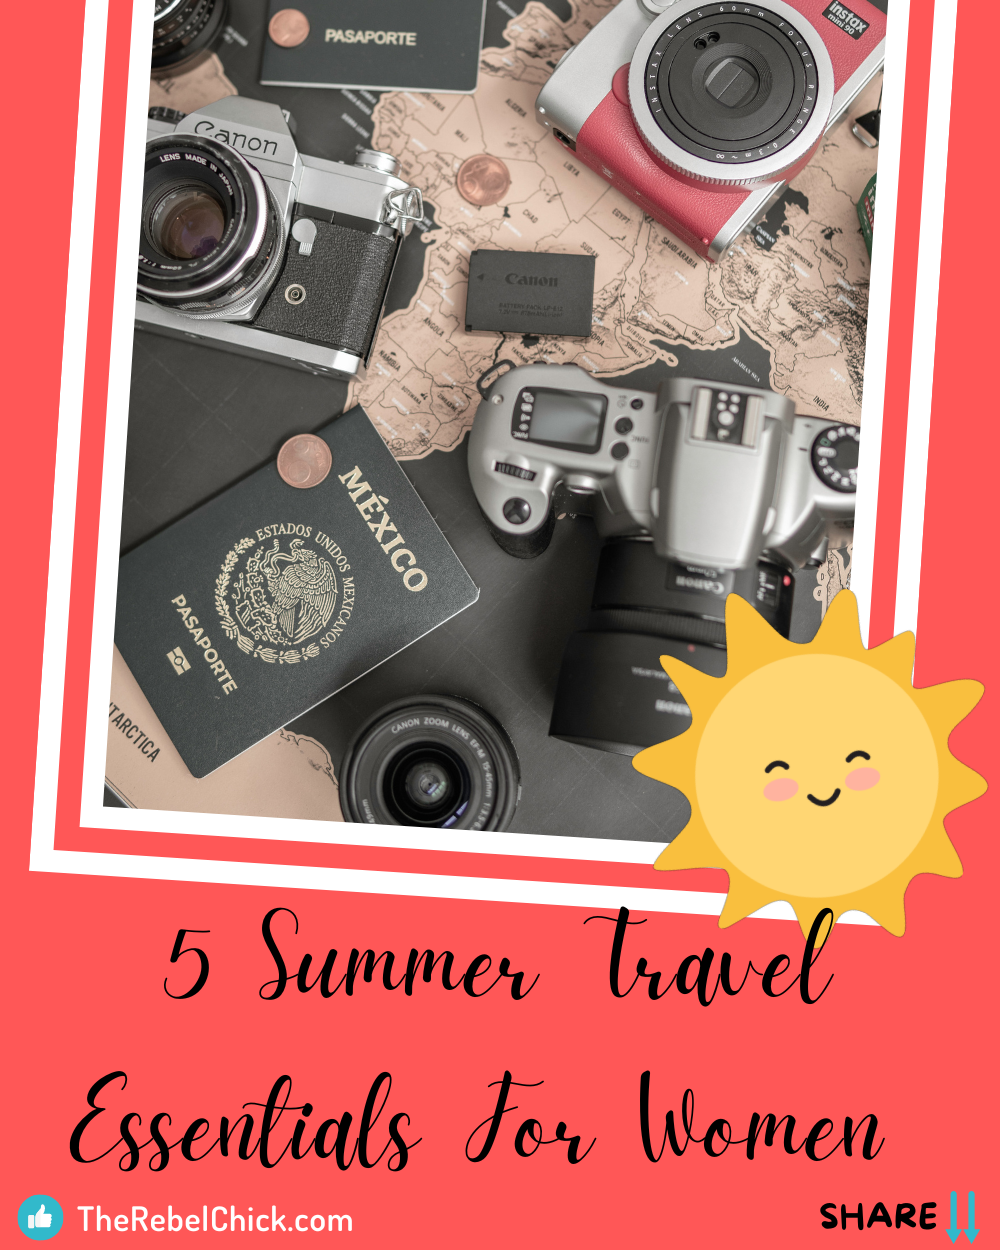 Summer Travel Essentials For Women - The Rebel Chick